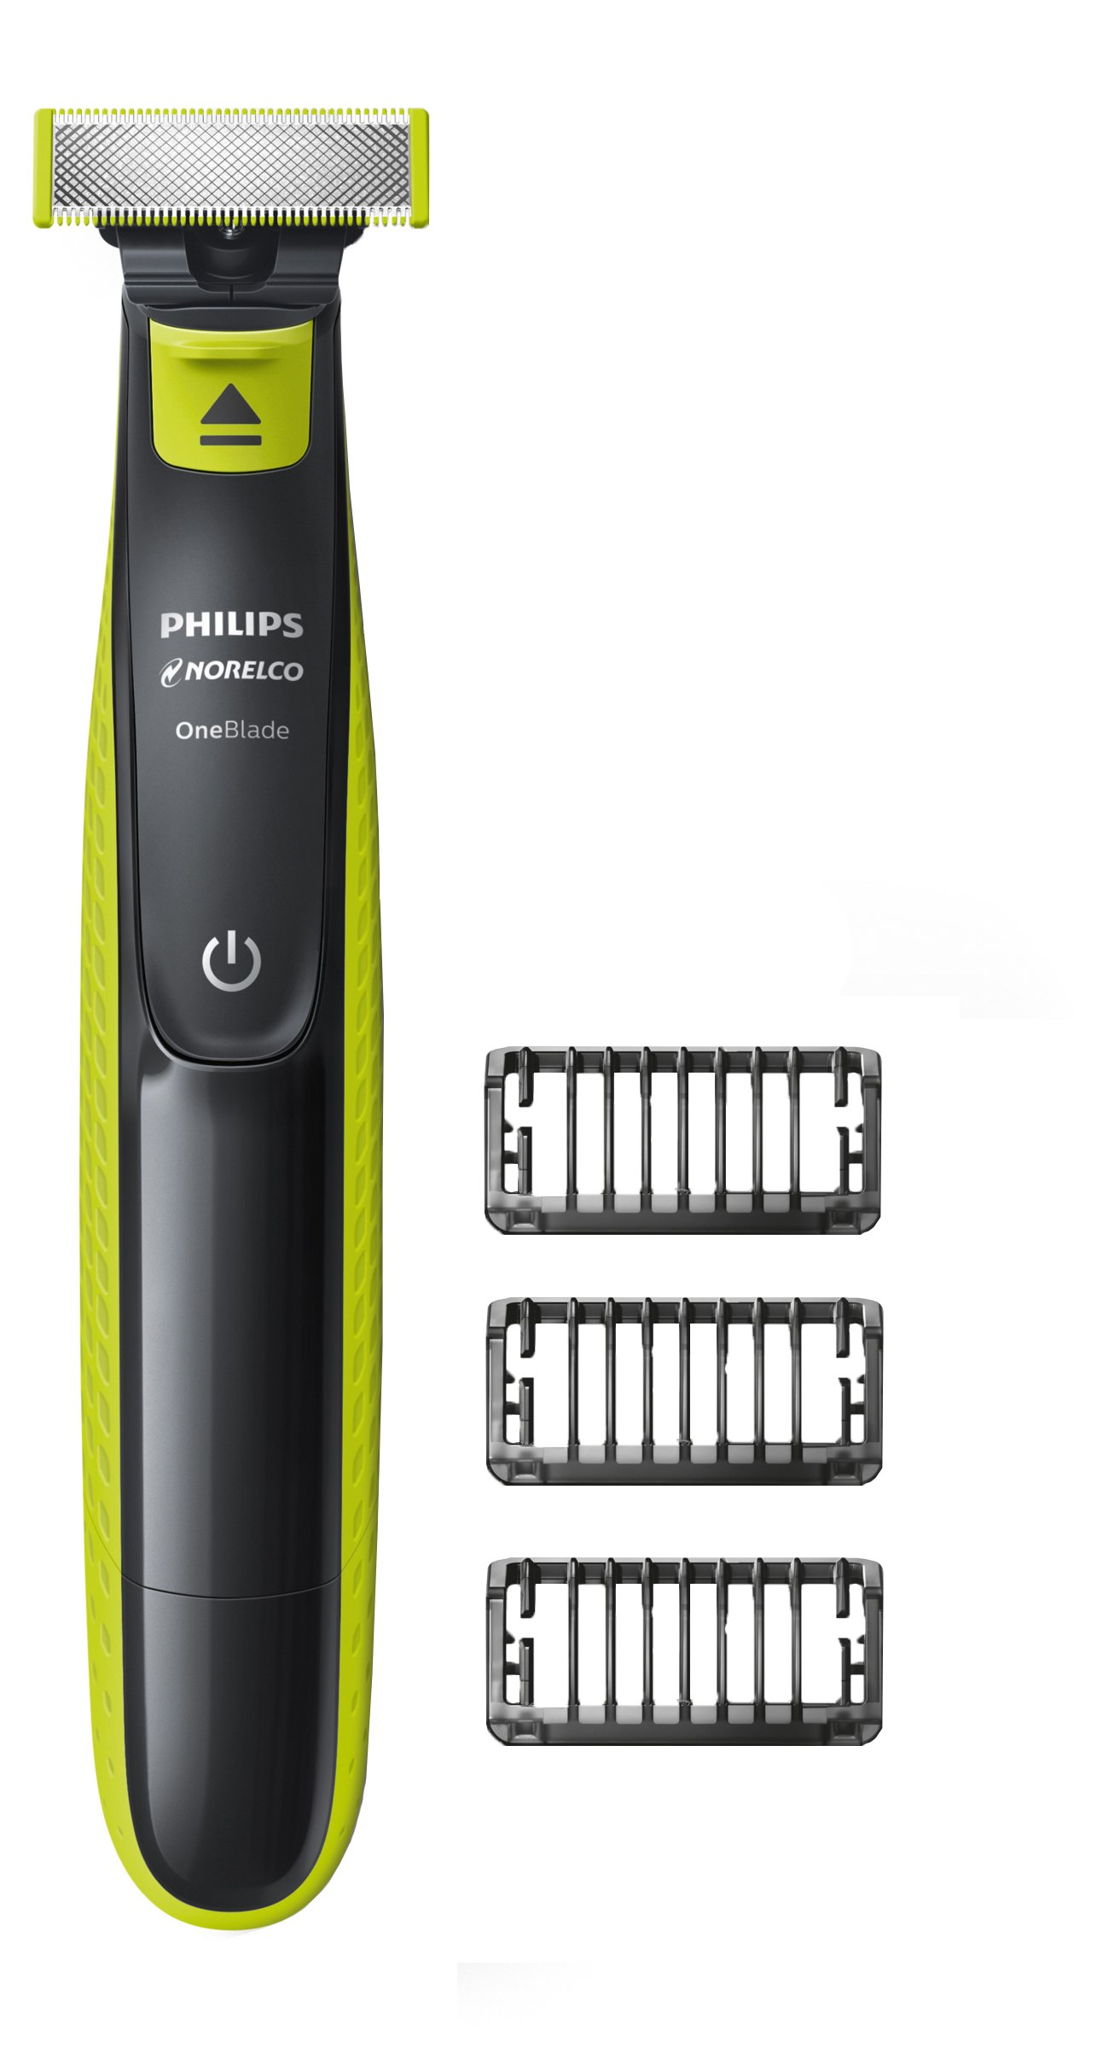 philips one blade review reddit